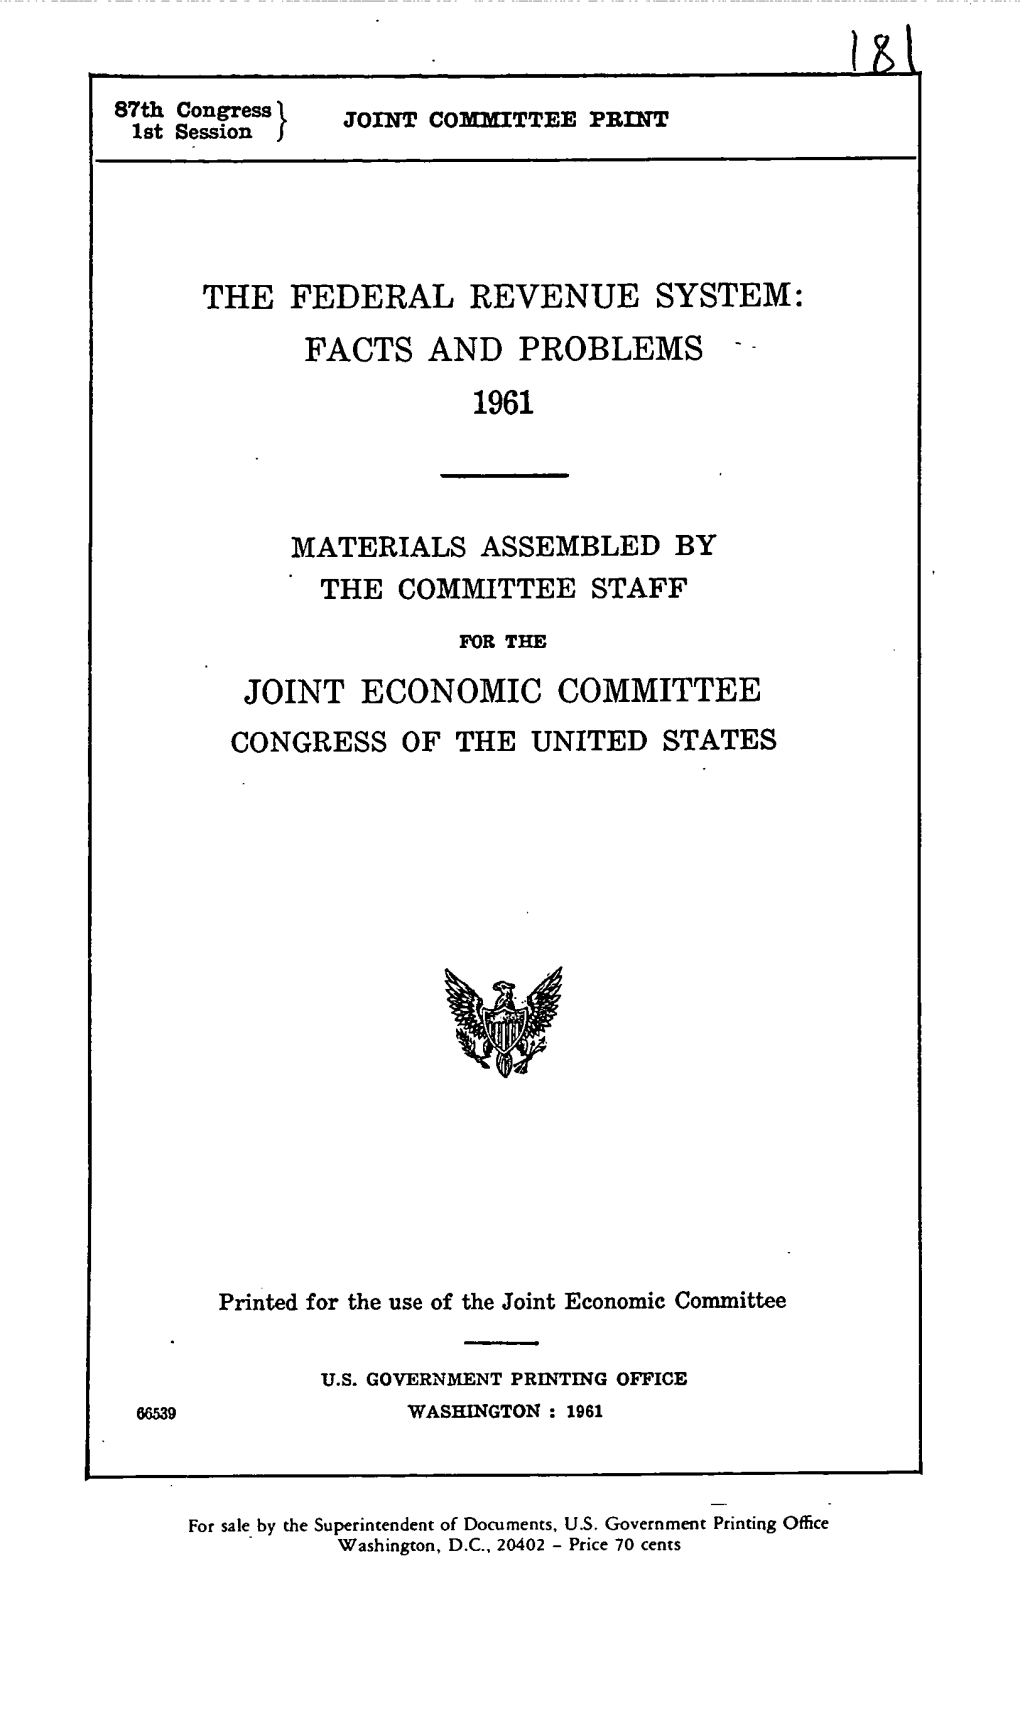 The Federal Revenue System: Facts and Problems -- 1961